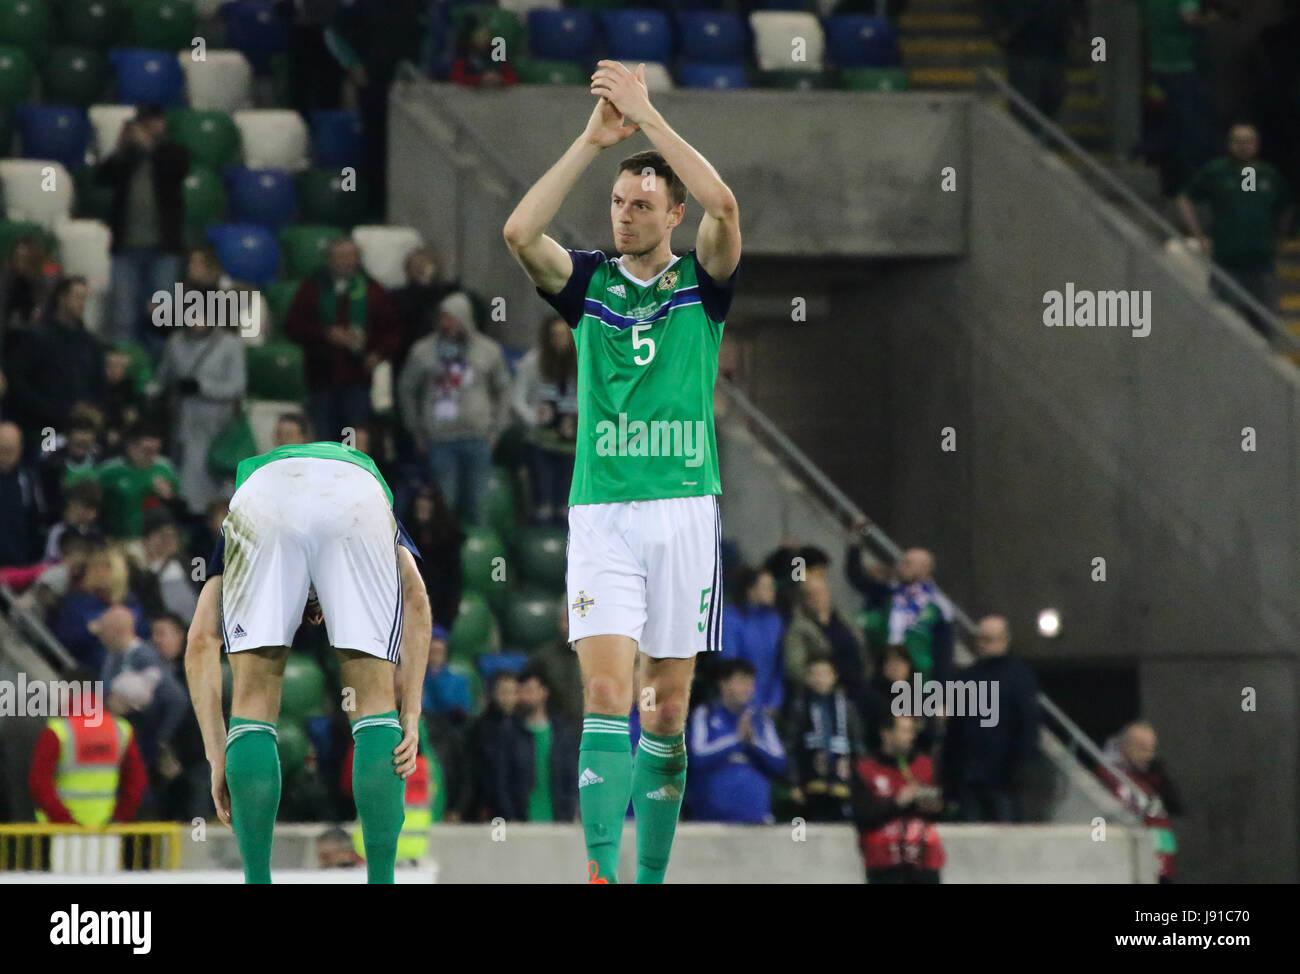 National Football Stadium at Windsor Park, Belfast. 26th March 2017. 2018 World Cup Qualifier - Northern Ireland 2 Norway 0. Northern Ireland's Jonny Evans (5) in action. Stock Photo